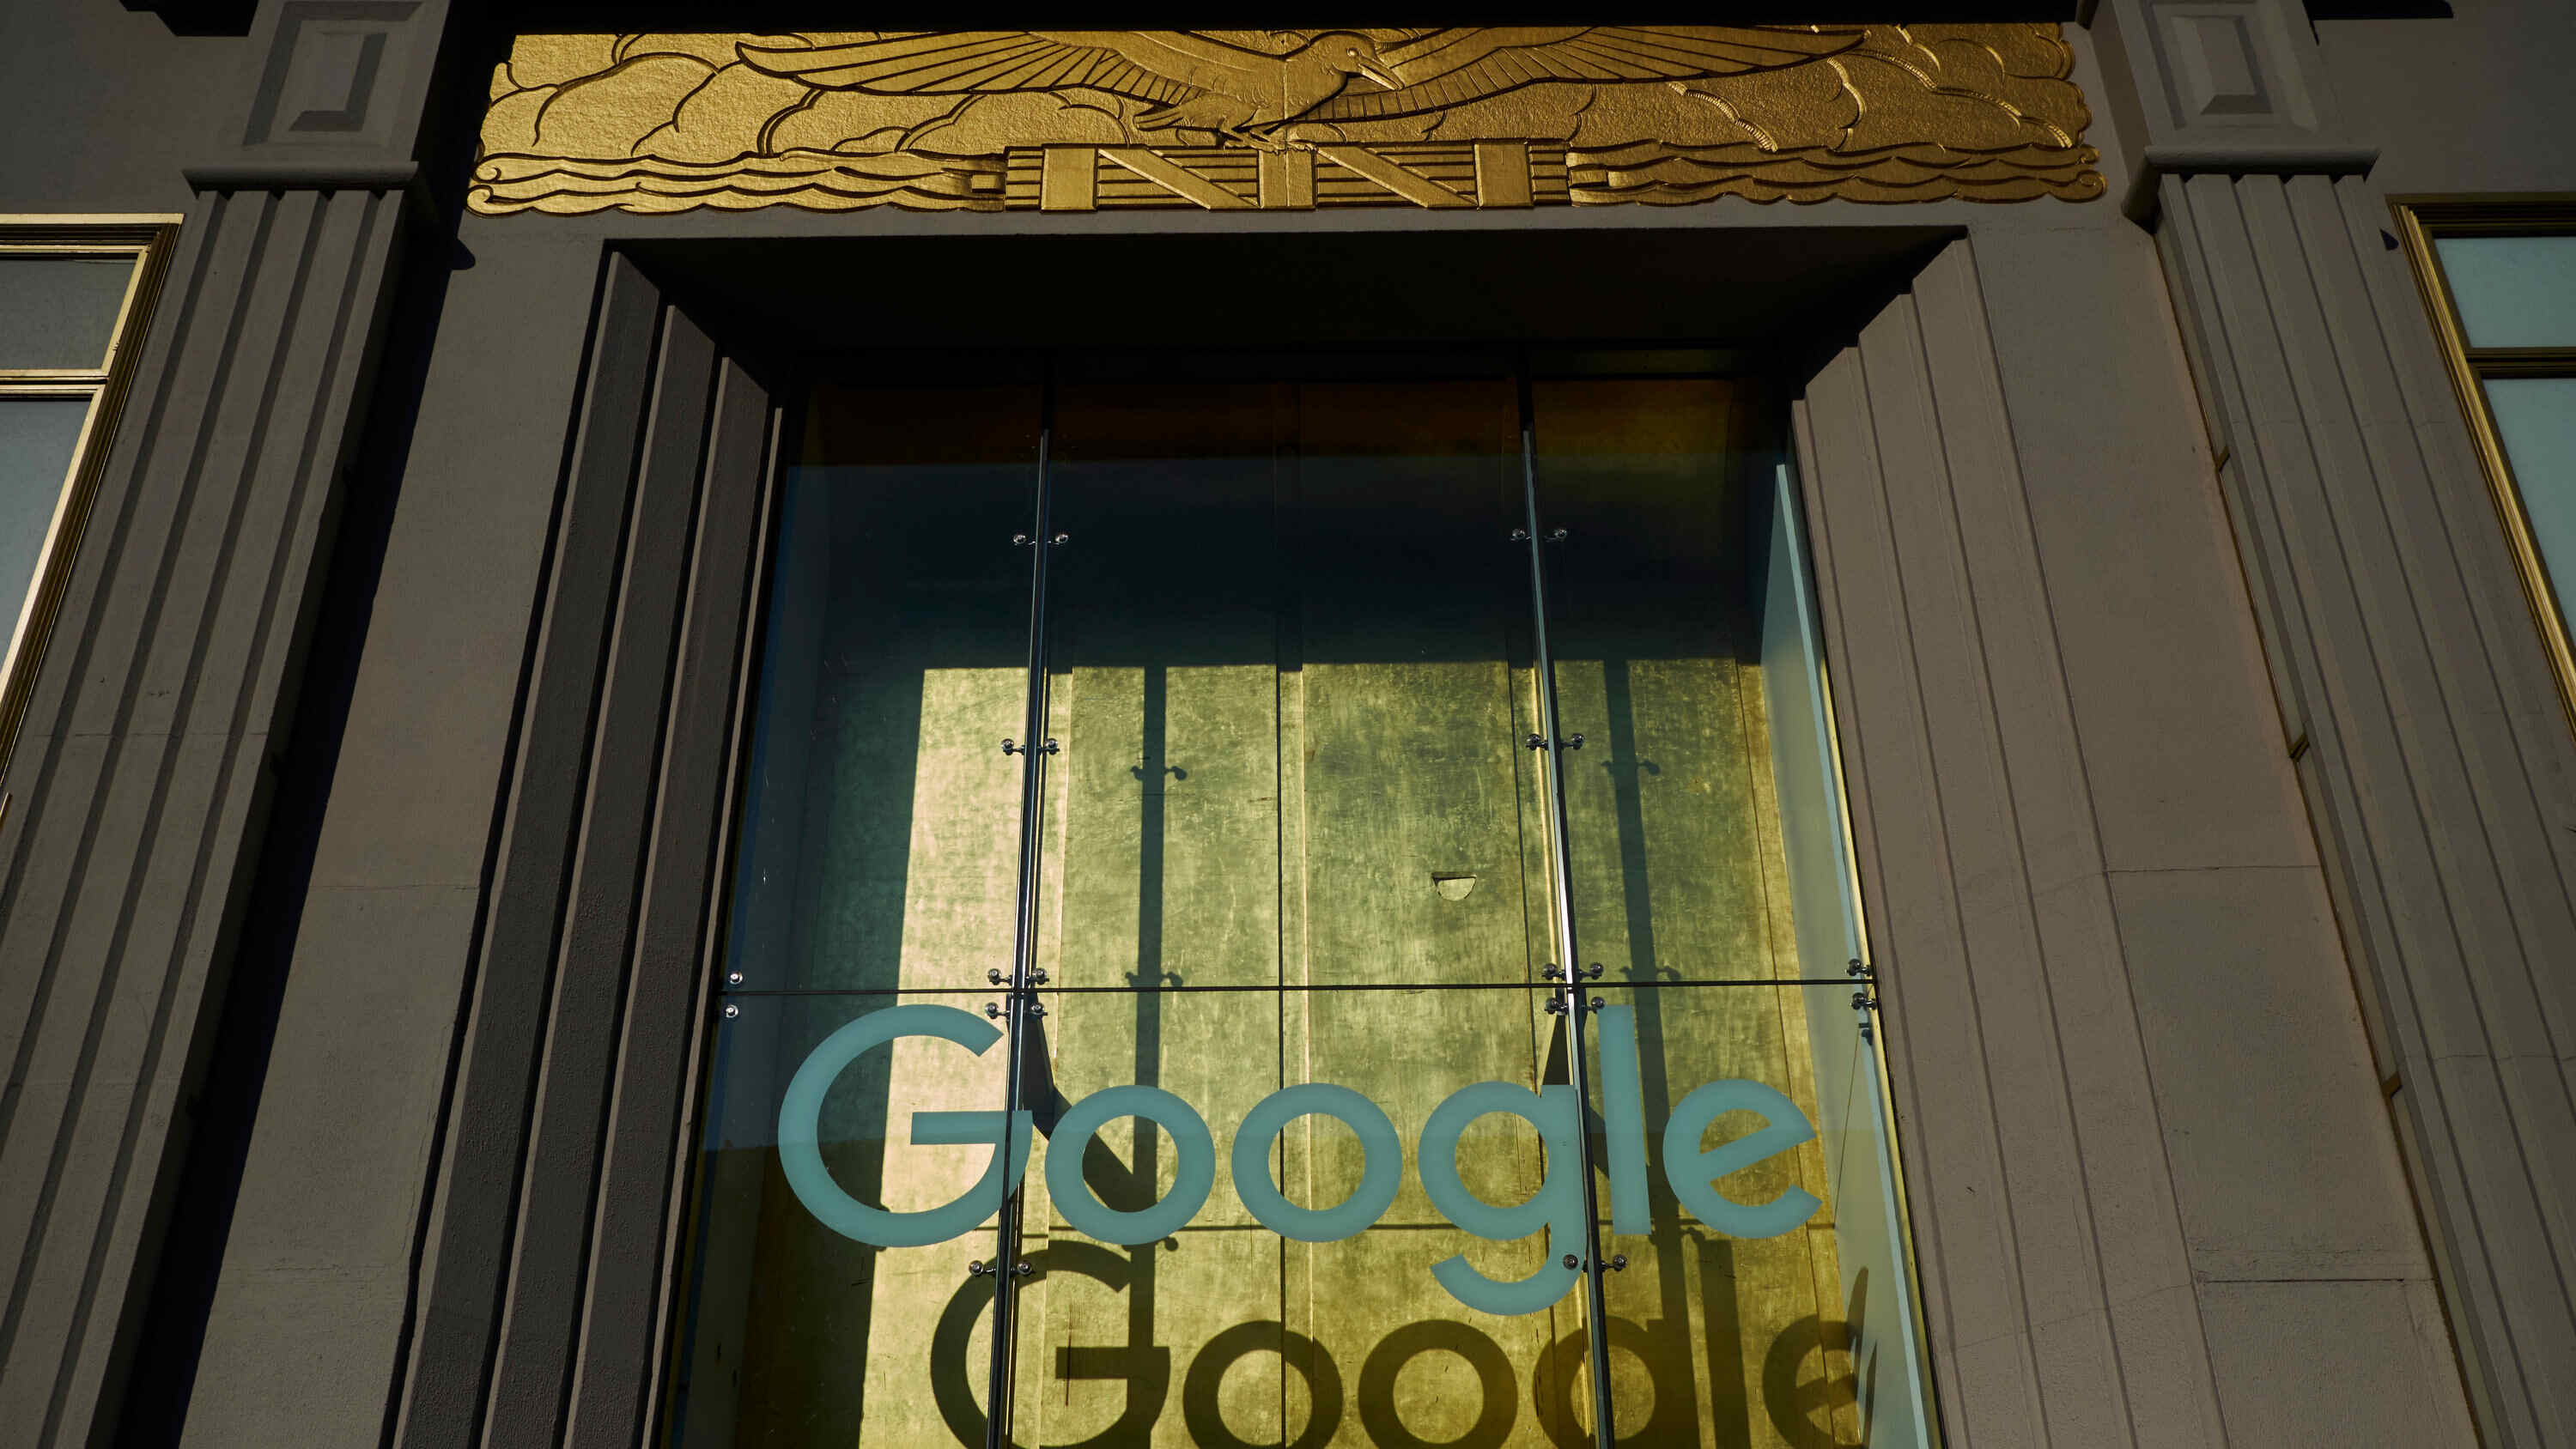 googles-october-9-event-in-new-york-city-what-to-expect